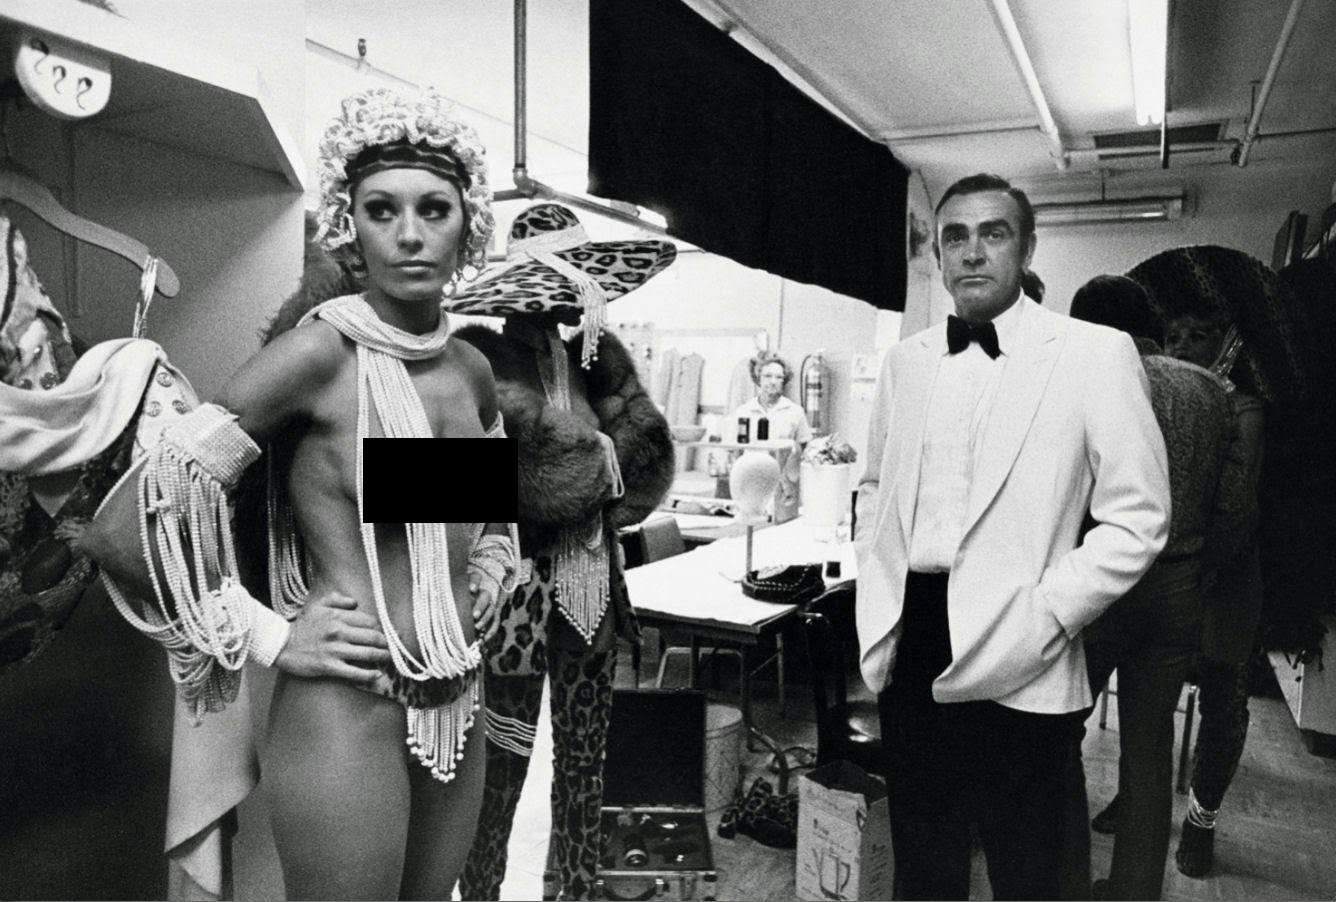 Sean Connery casually awaiting a scene with a topless showgirl who was an extra in Diamonds Are Forever (1971).